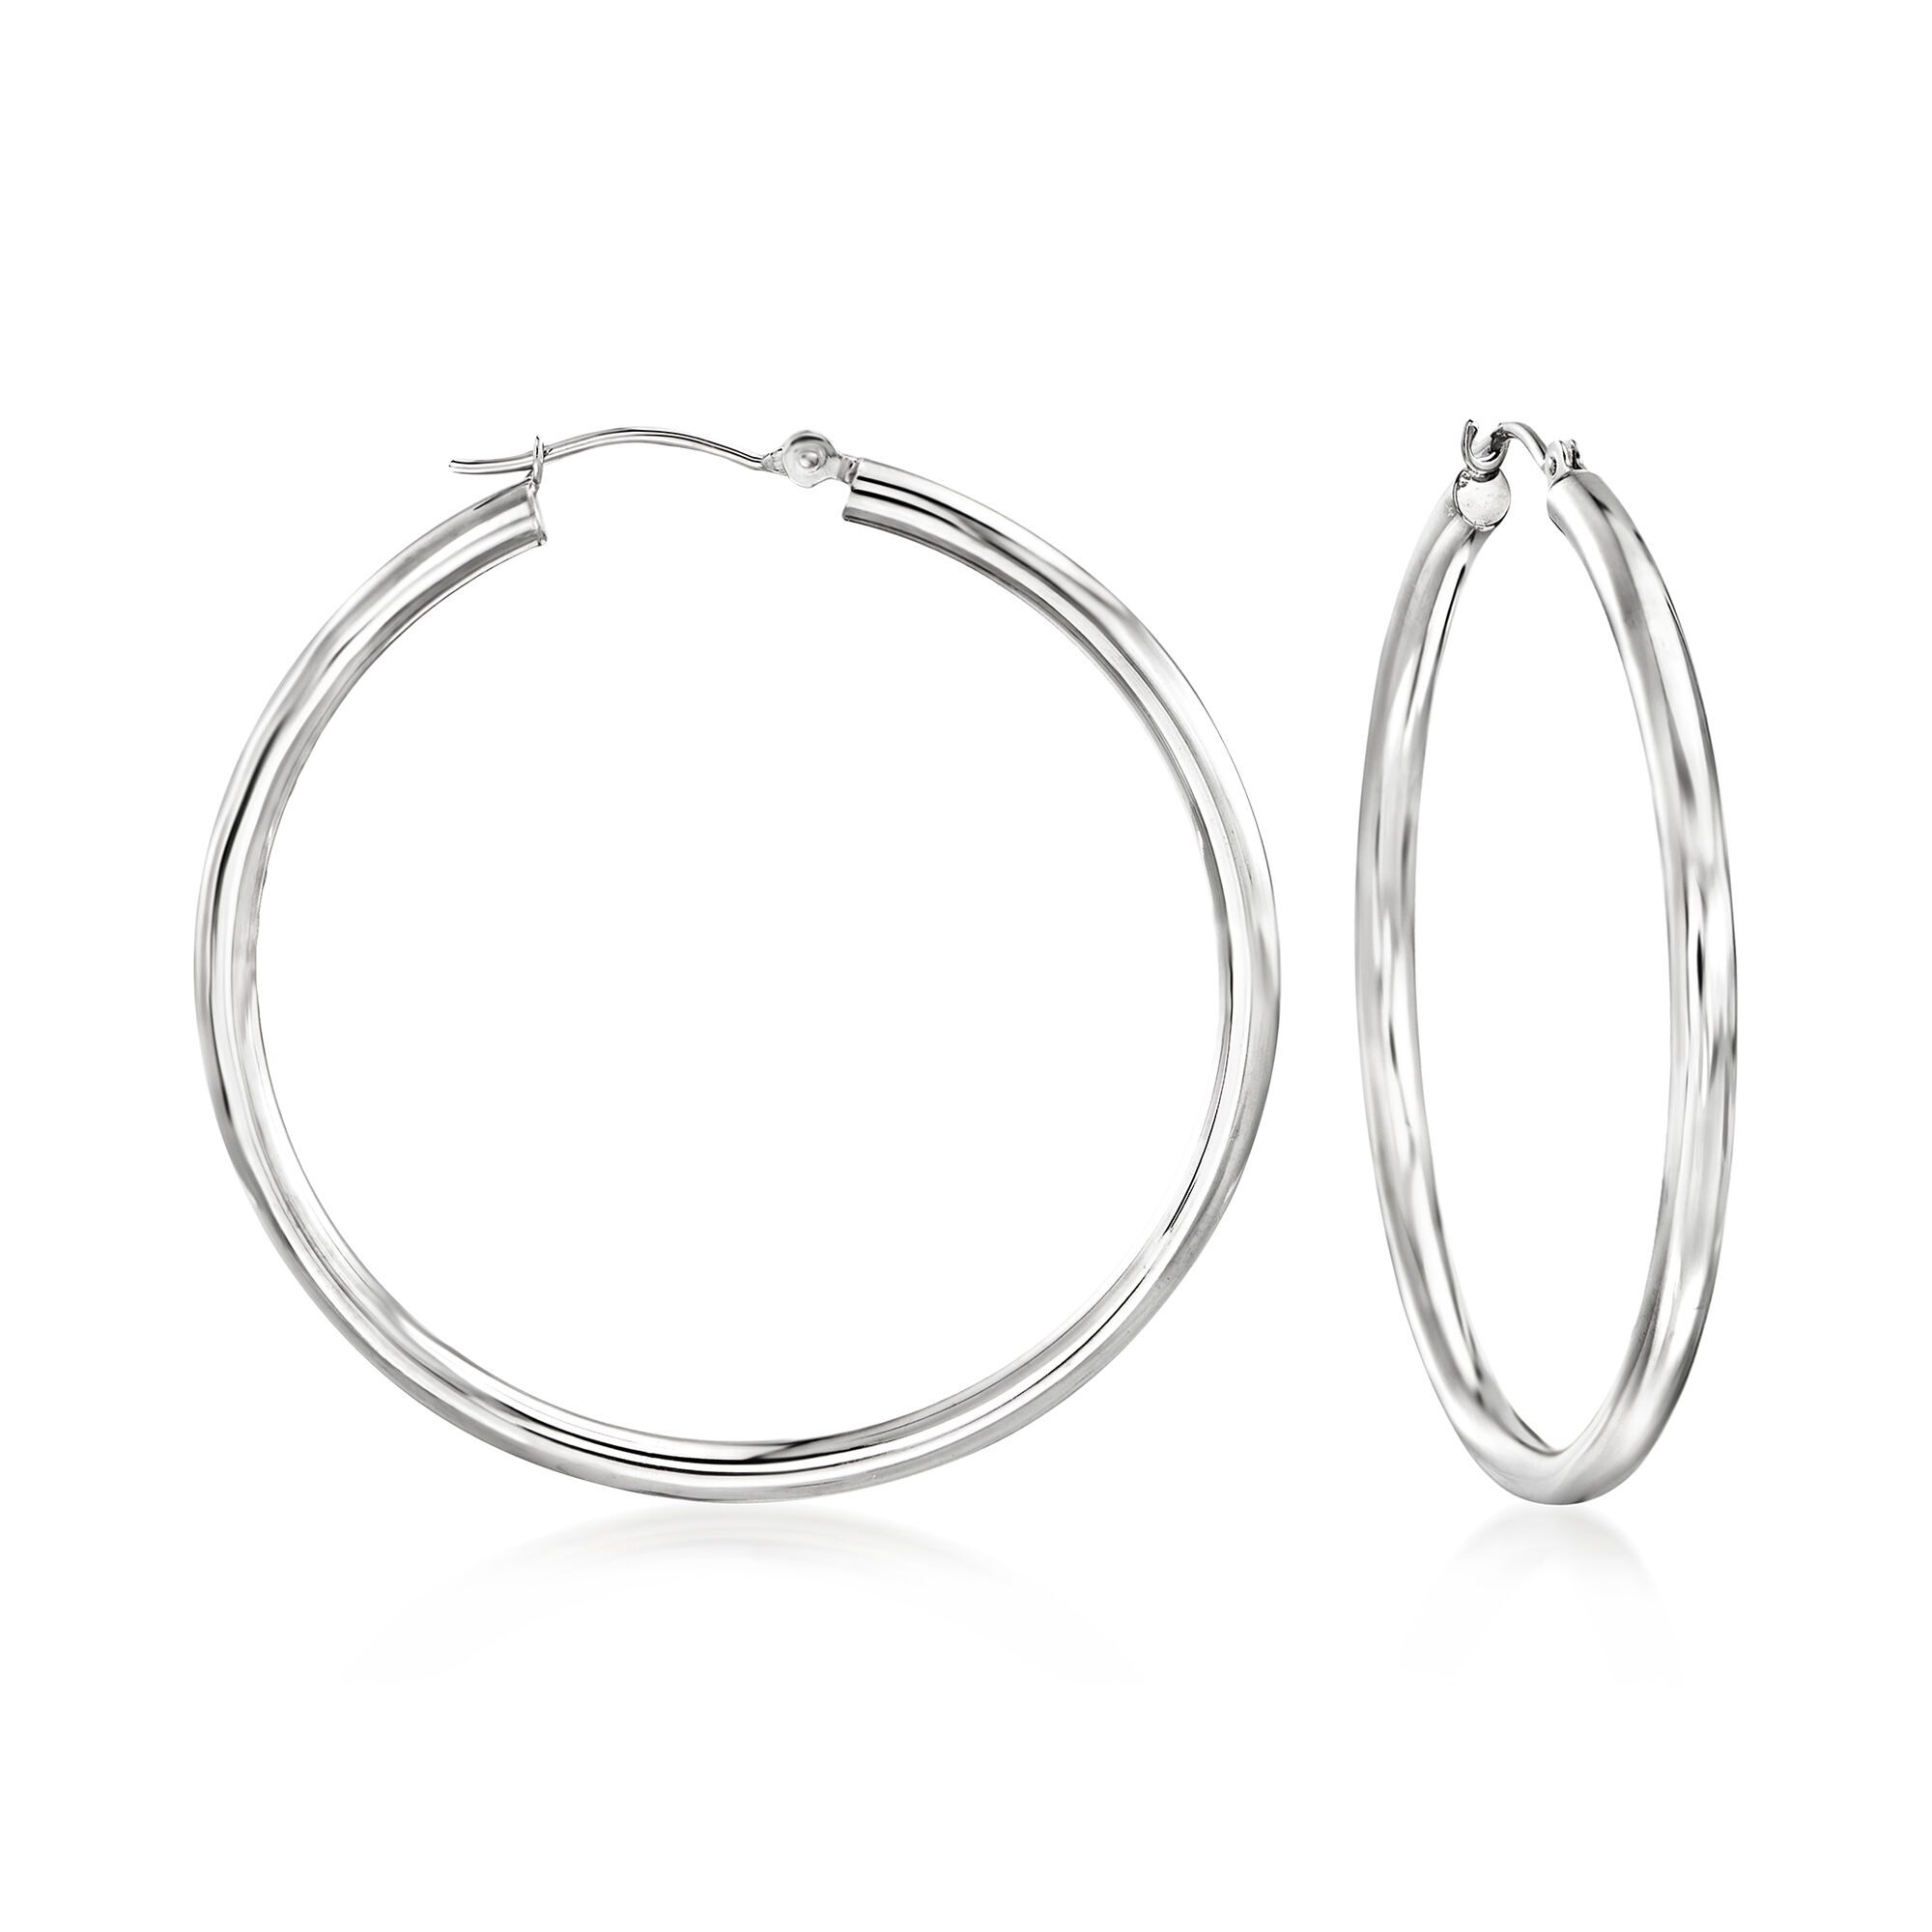 14K Real White Gold 1.5mm Thickness Polished Endless Hoop Earrings 35mm 1 3/8" 